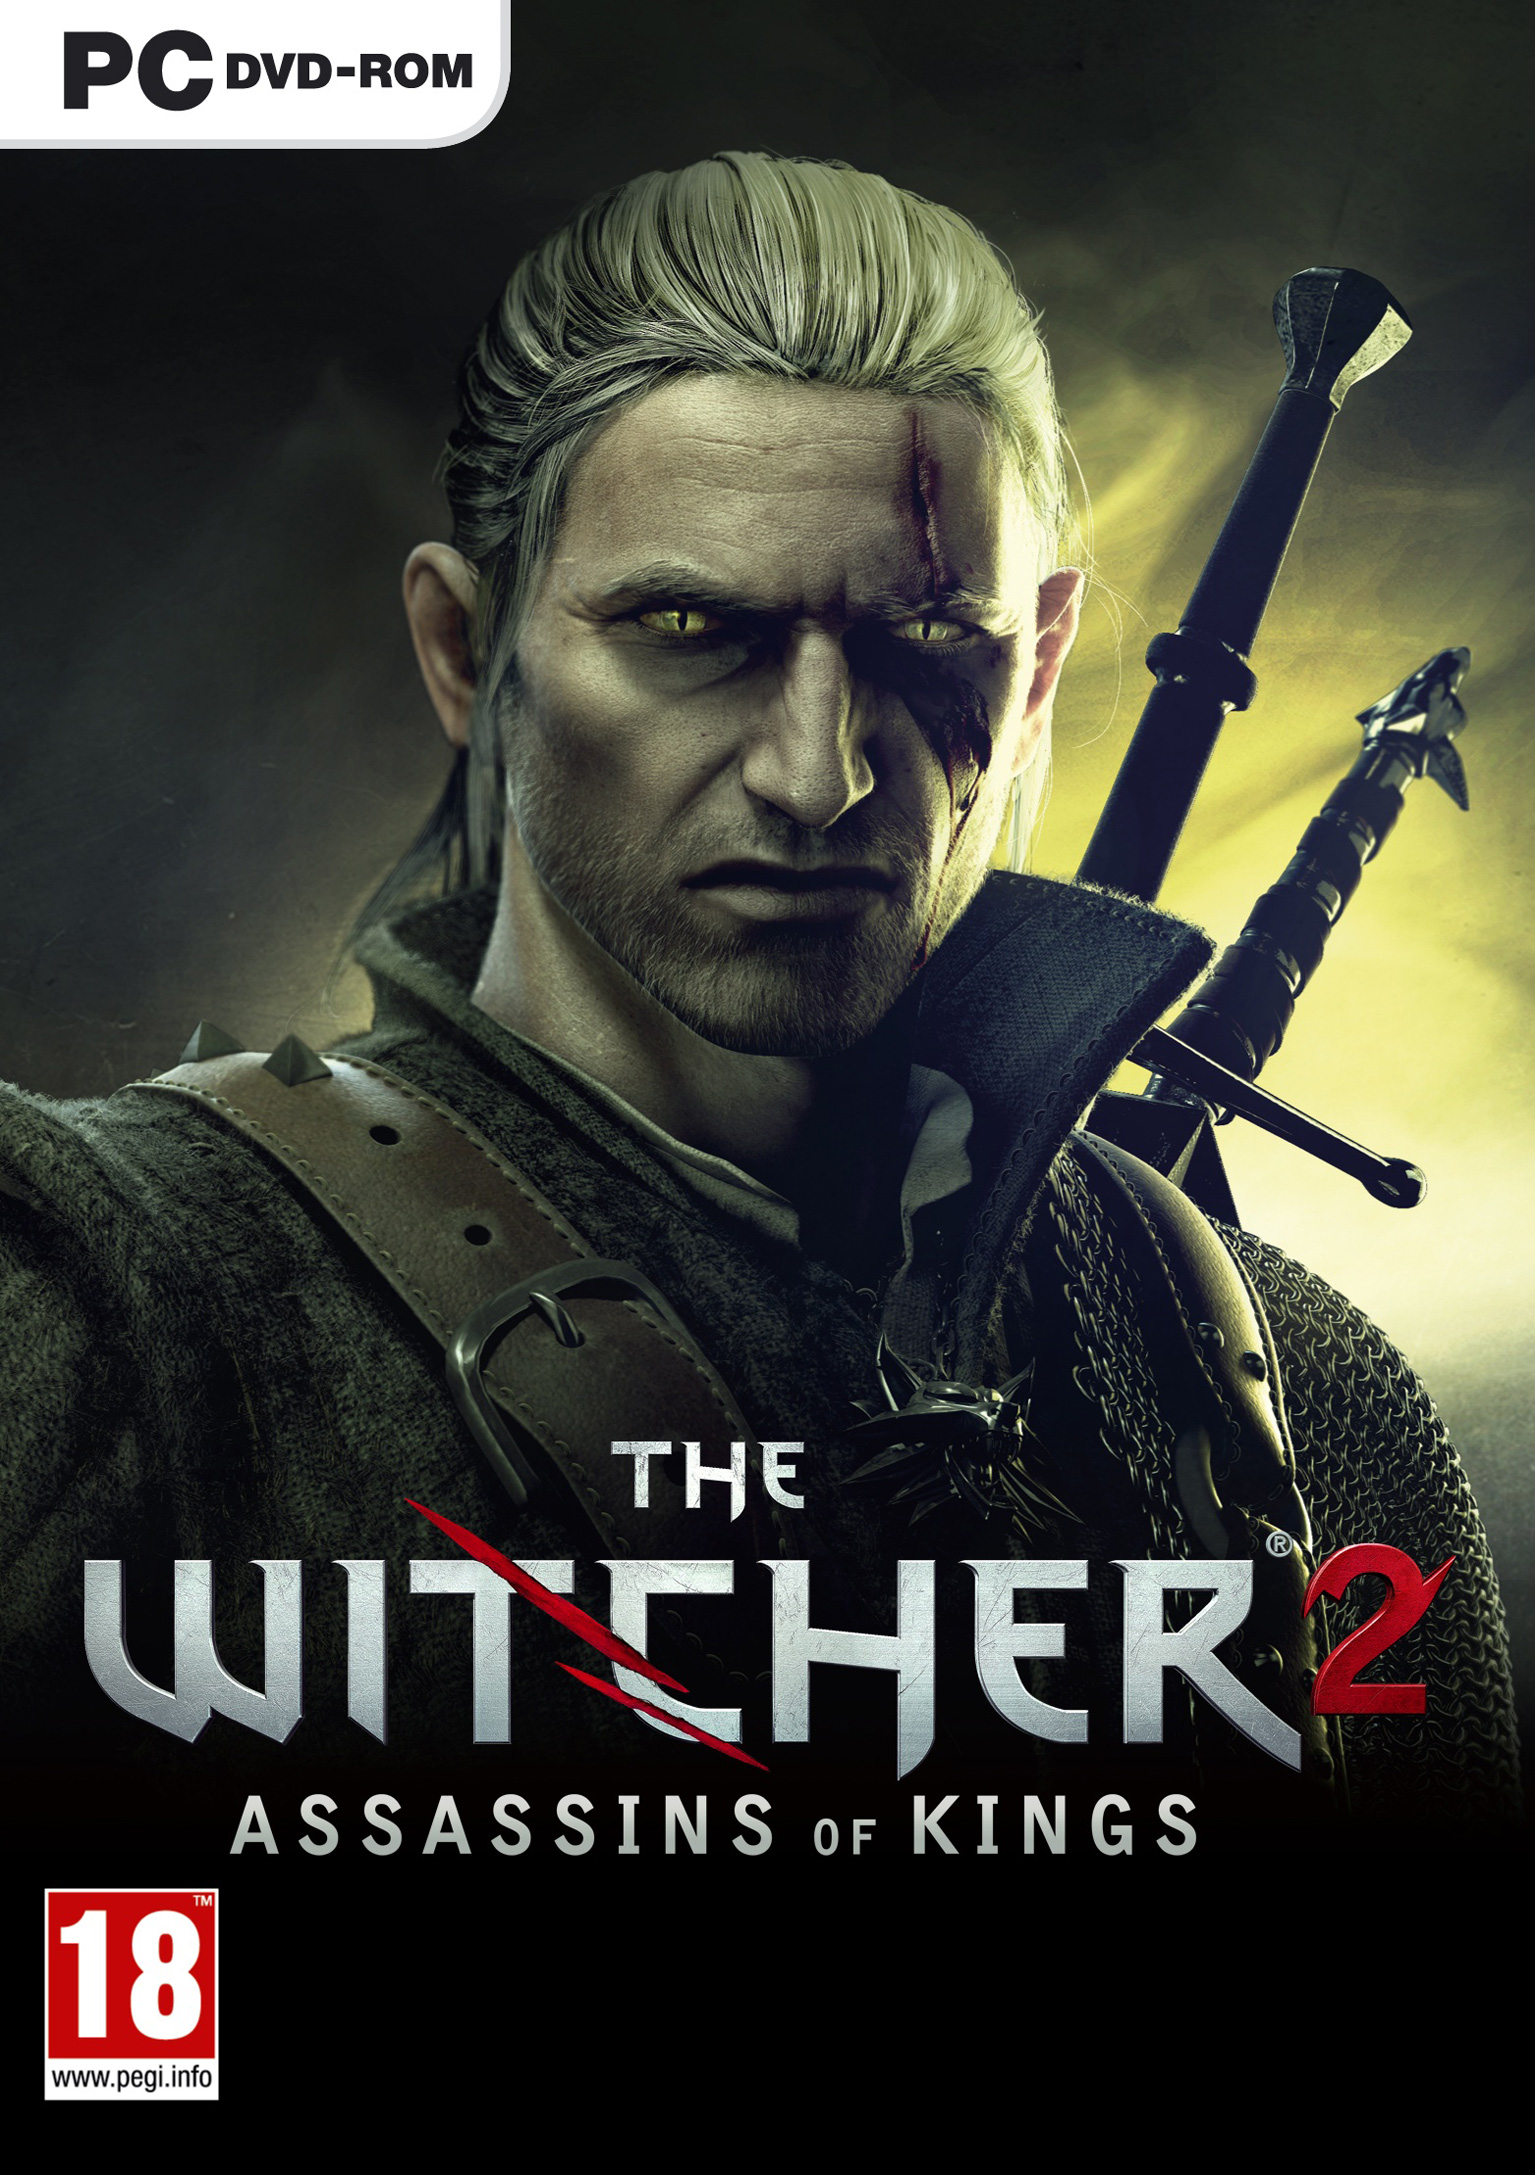 The Witcher 2: Assassins of Kings - predn DVD obal